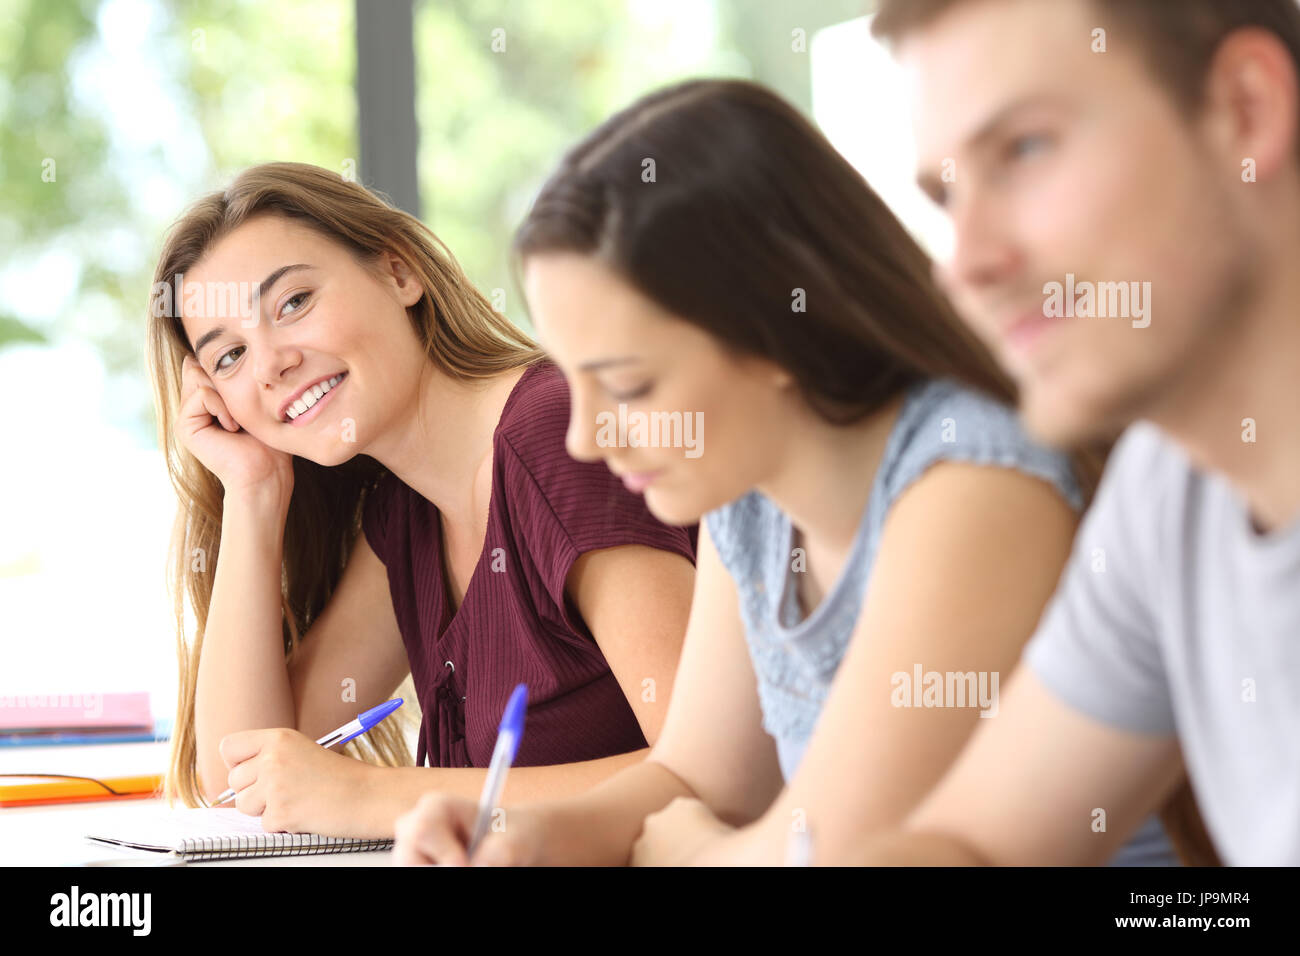 Student in love looking at a handsome classmate in a classroom Stock Photo